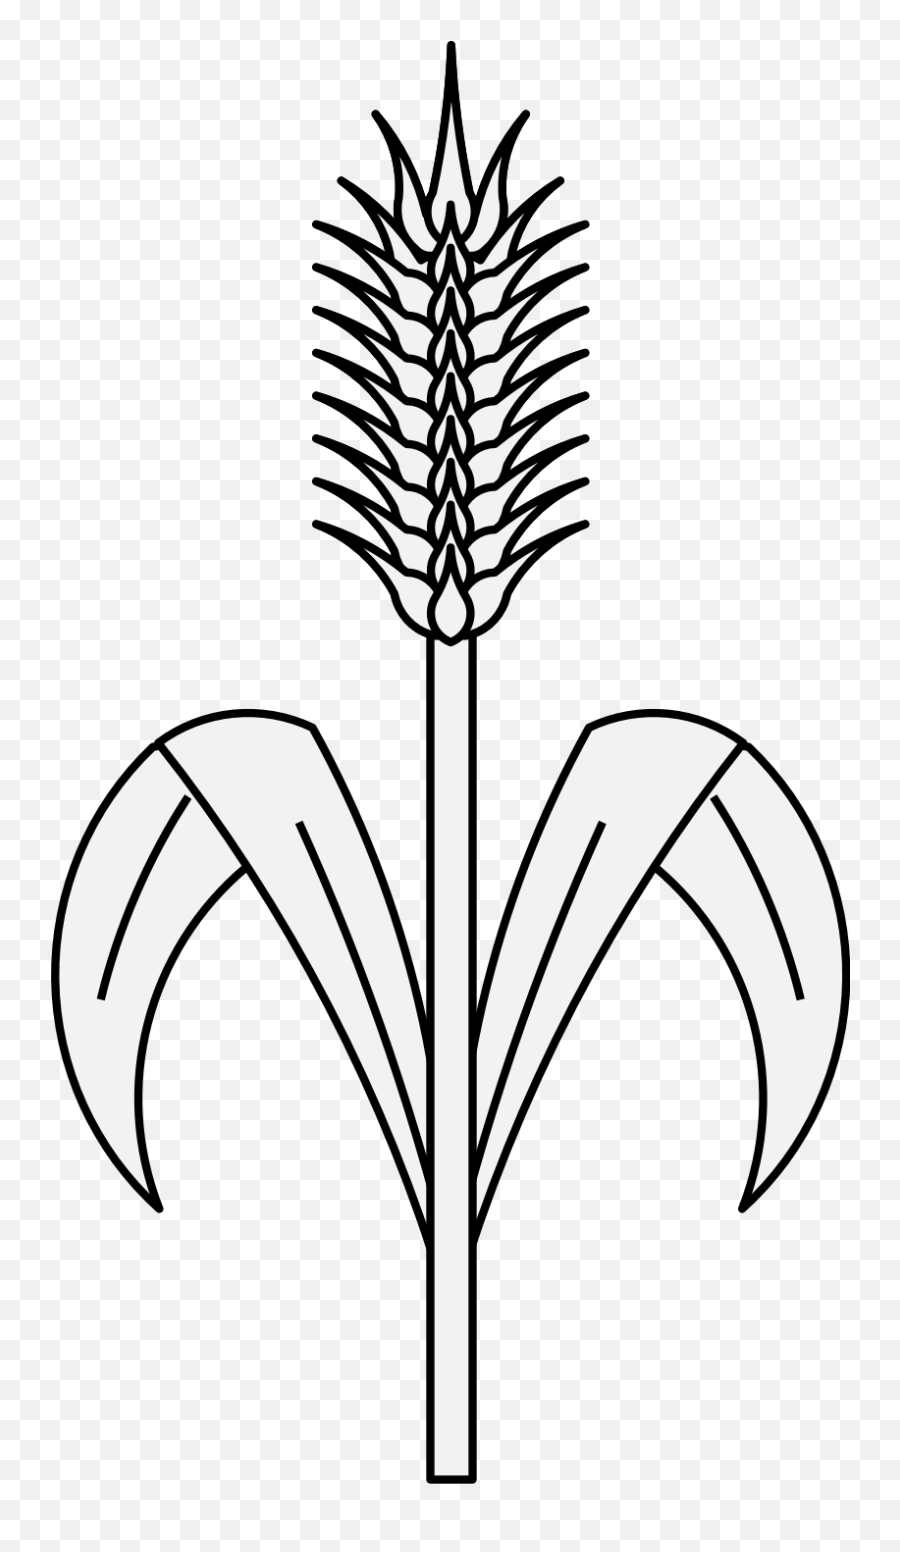 Wheat - Traceable Heraldic Art Drawing Of Wheat Tree Png,Wheat Png